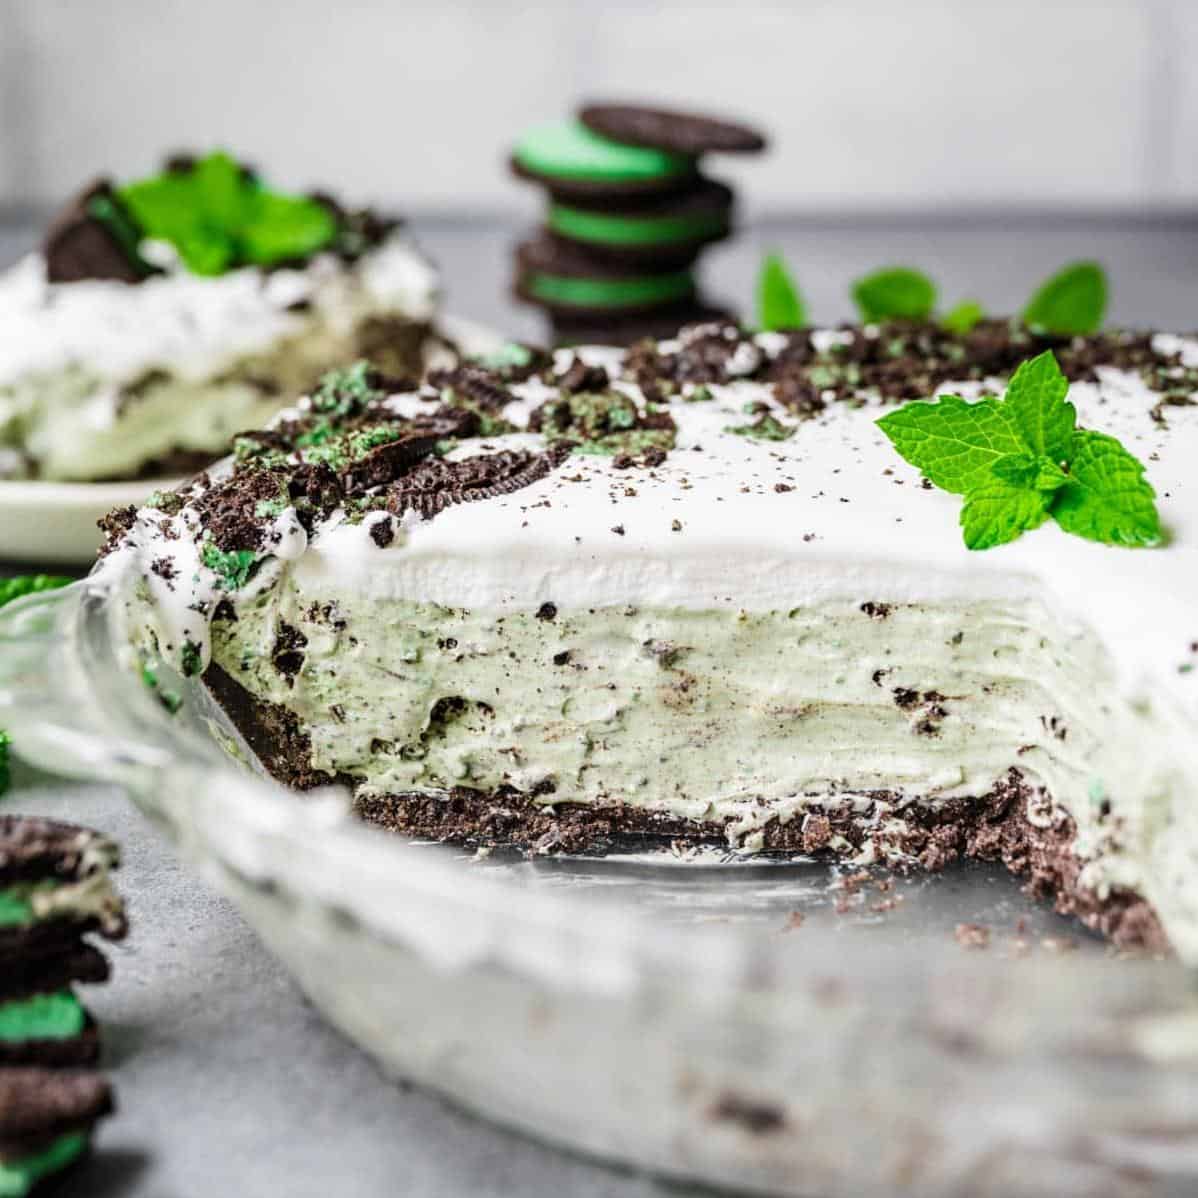  A slice of summer - Brookside Country Club Grasshopper Pie